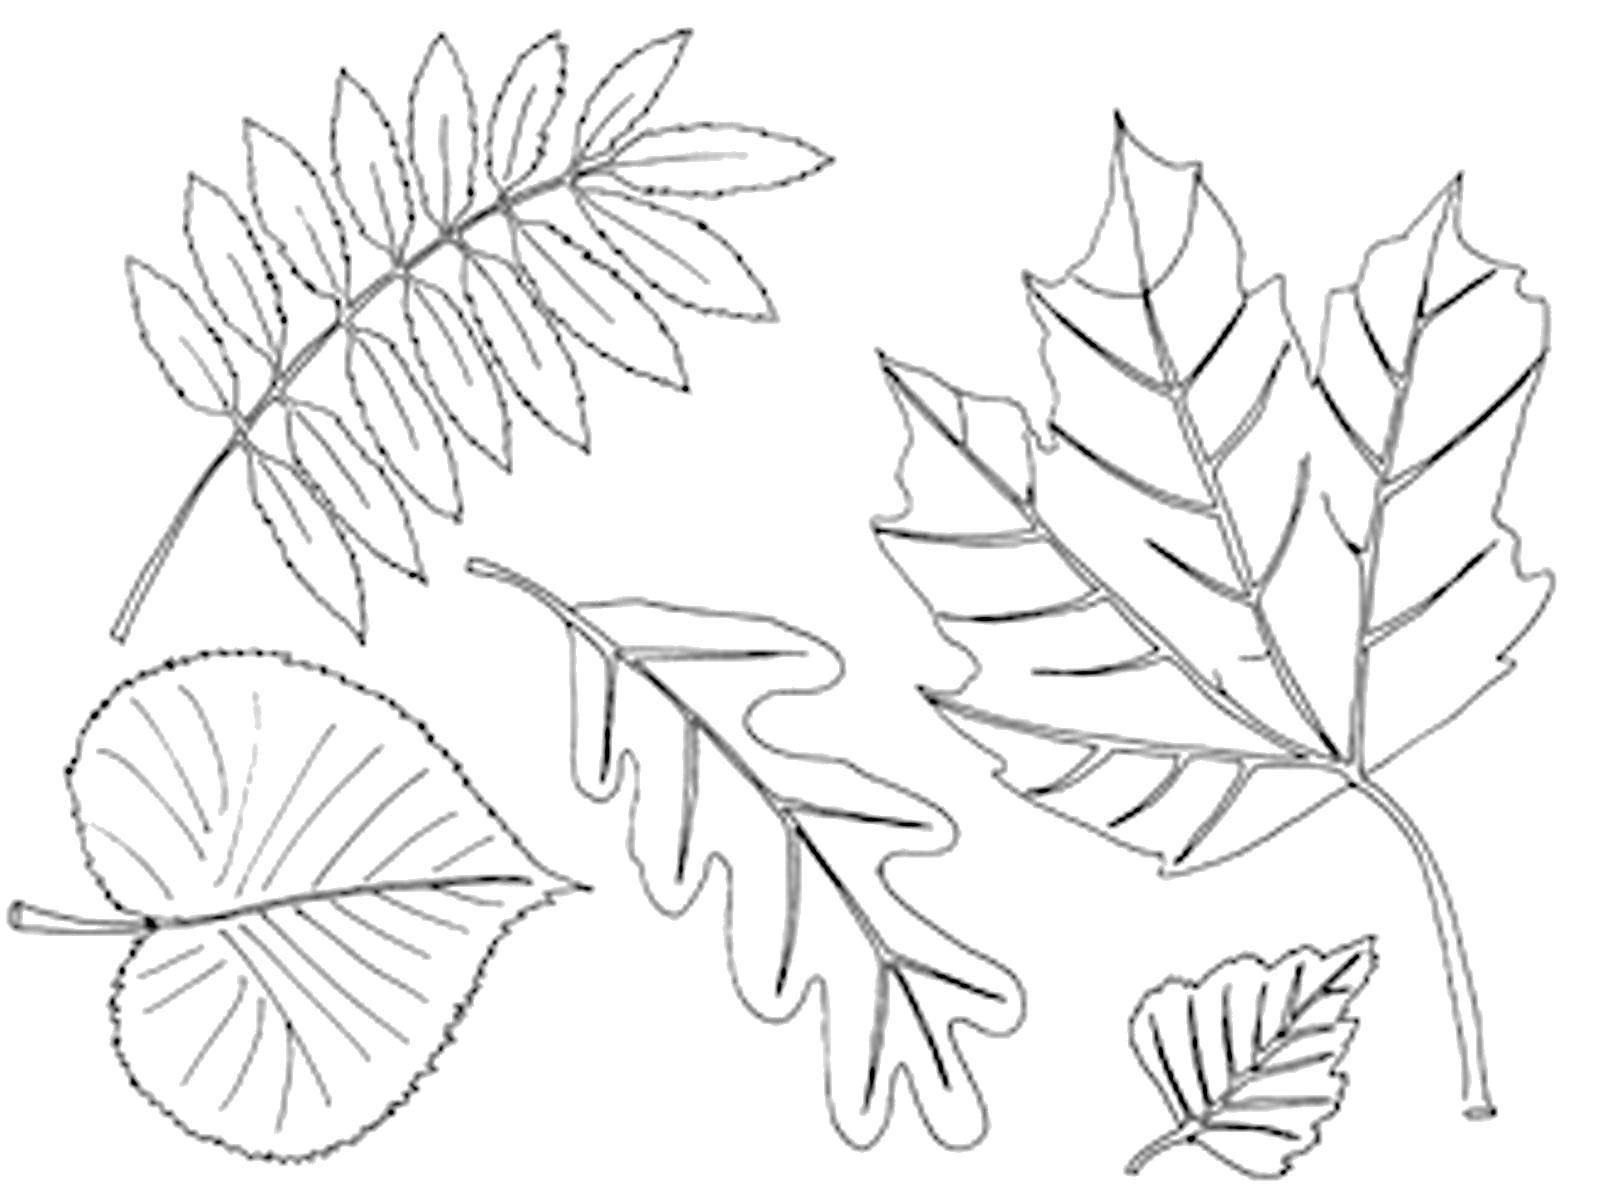 Coloring Beautiful leaves. Category leaves. Tags:  Leaves, tree.